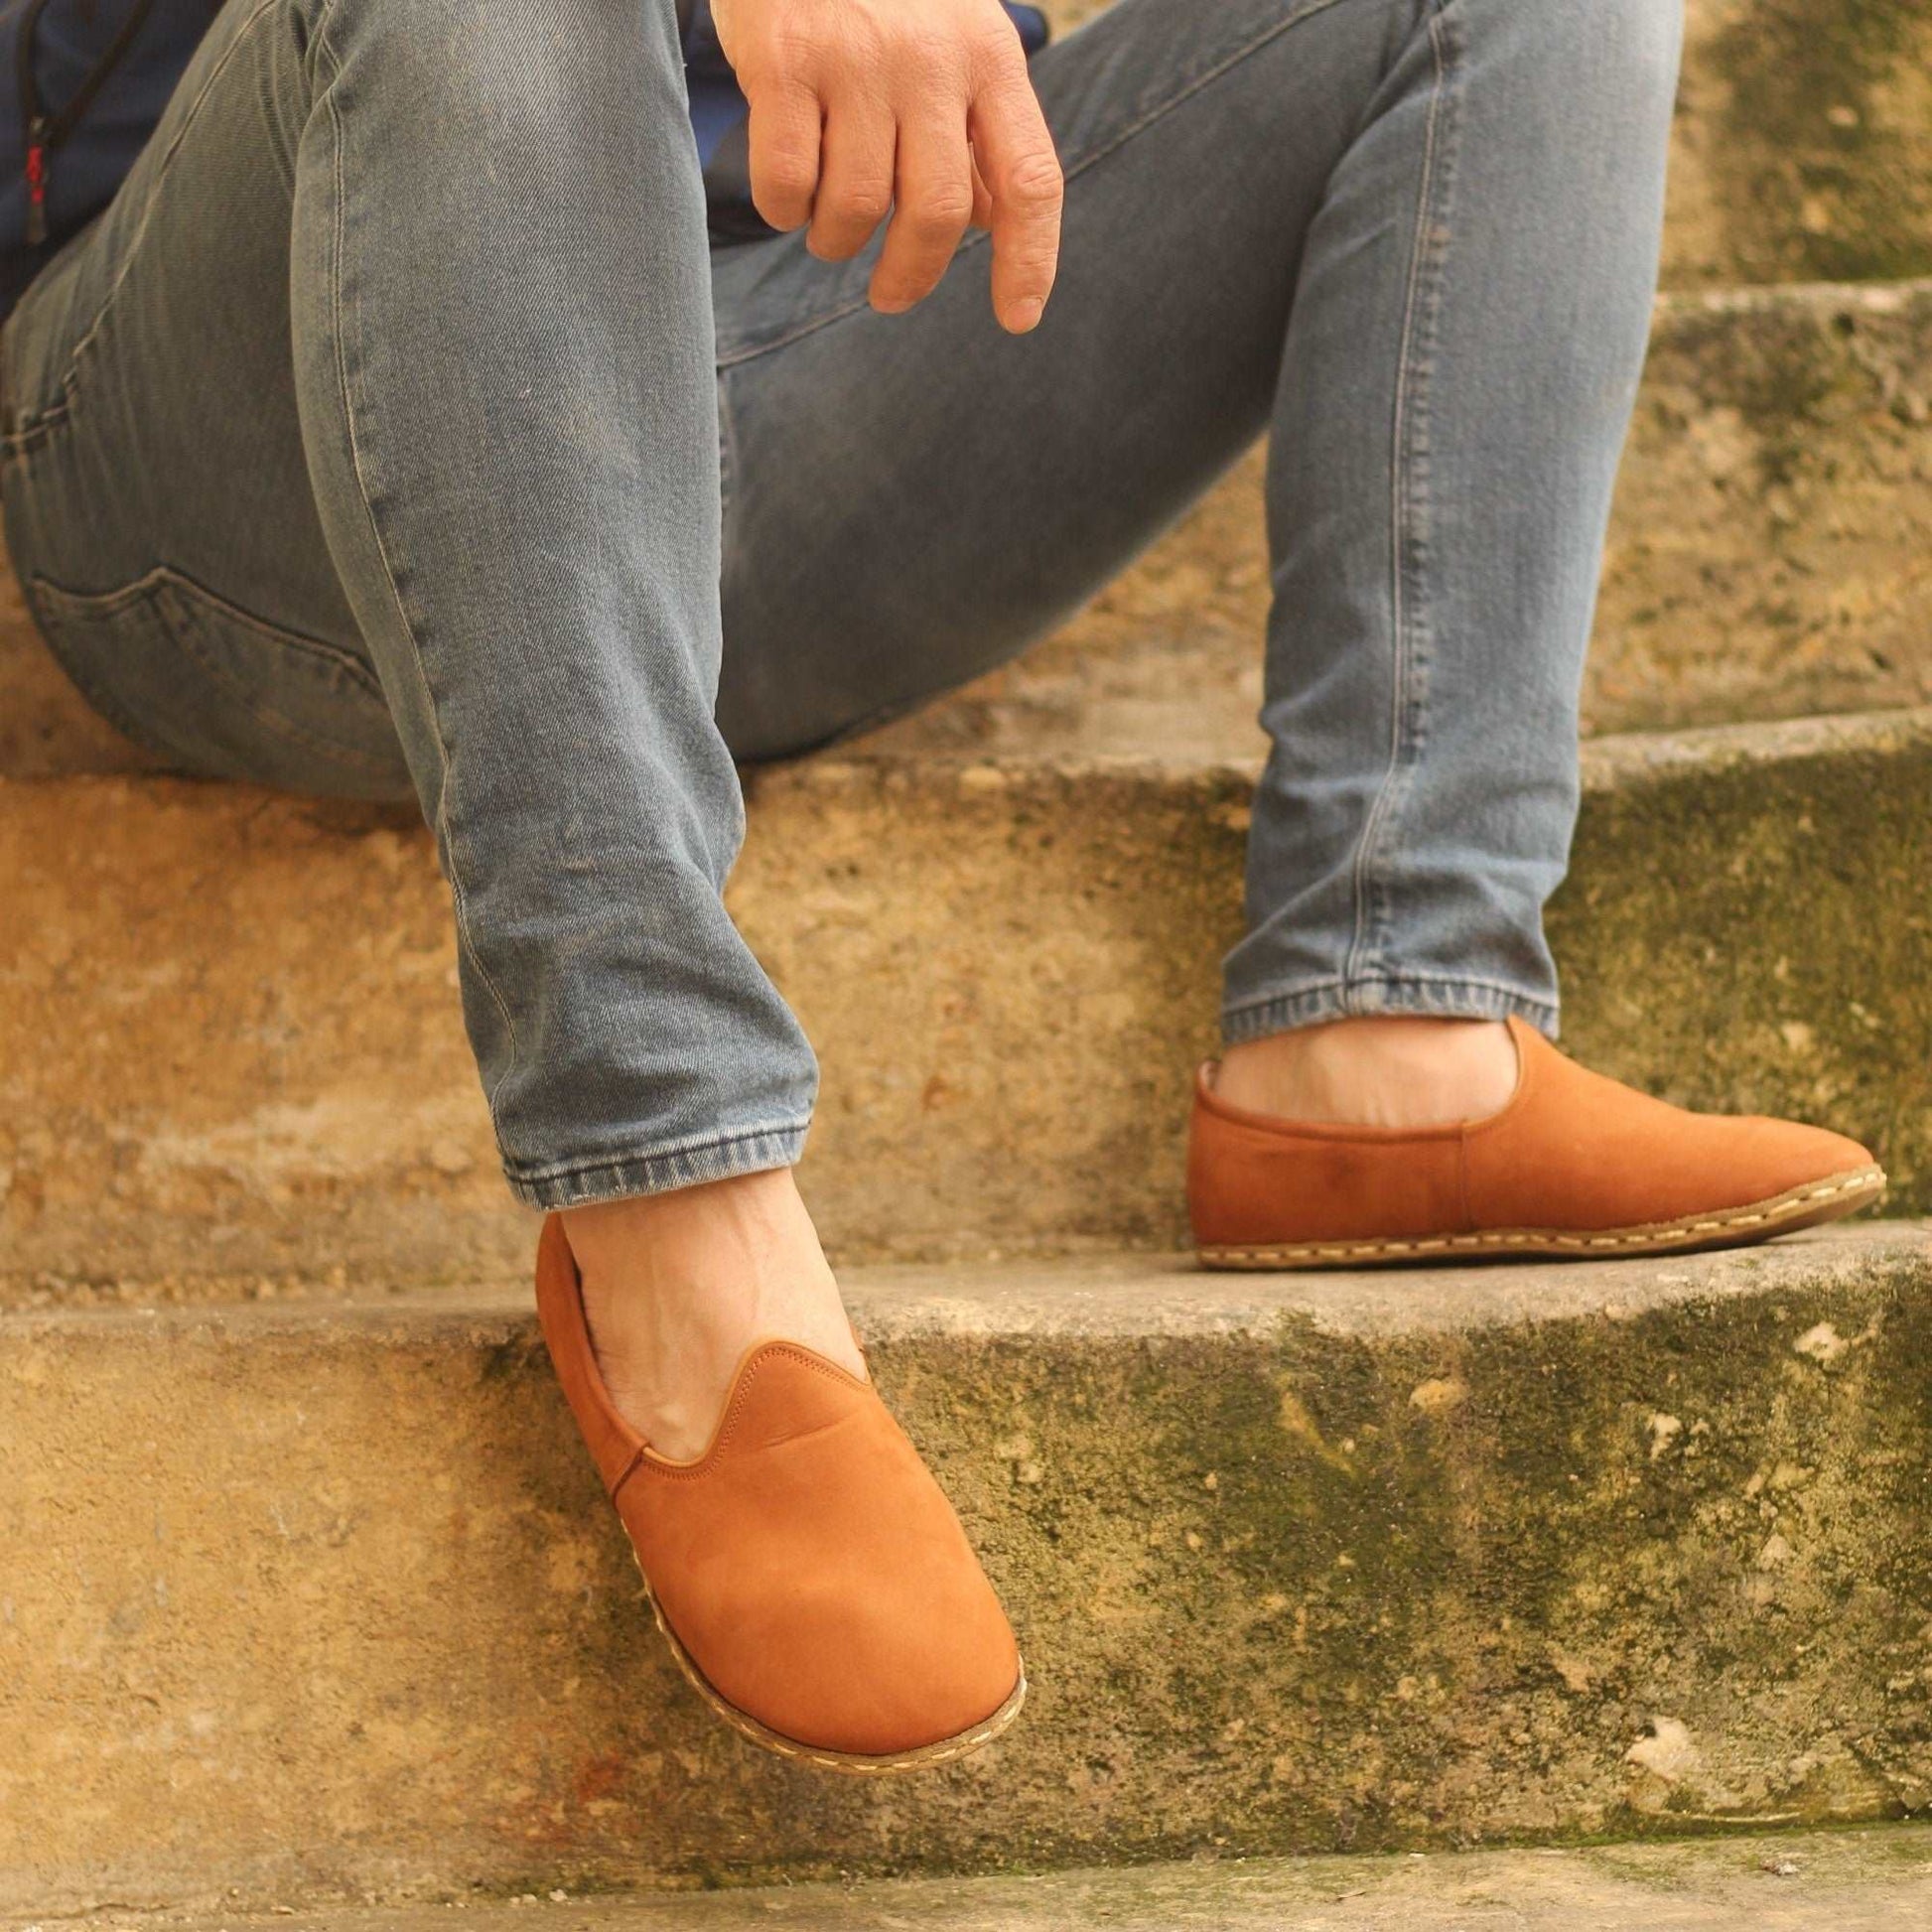 Leather Moccasin Sneakers Flats, Mens Orange Leather Shoes